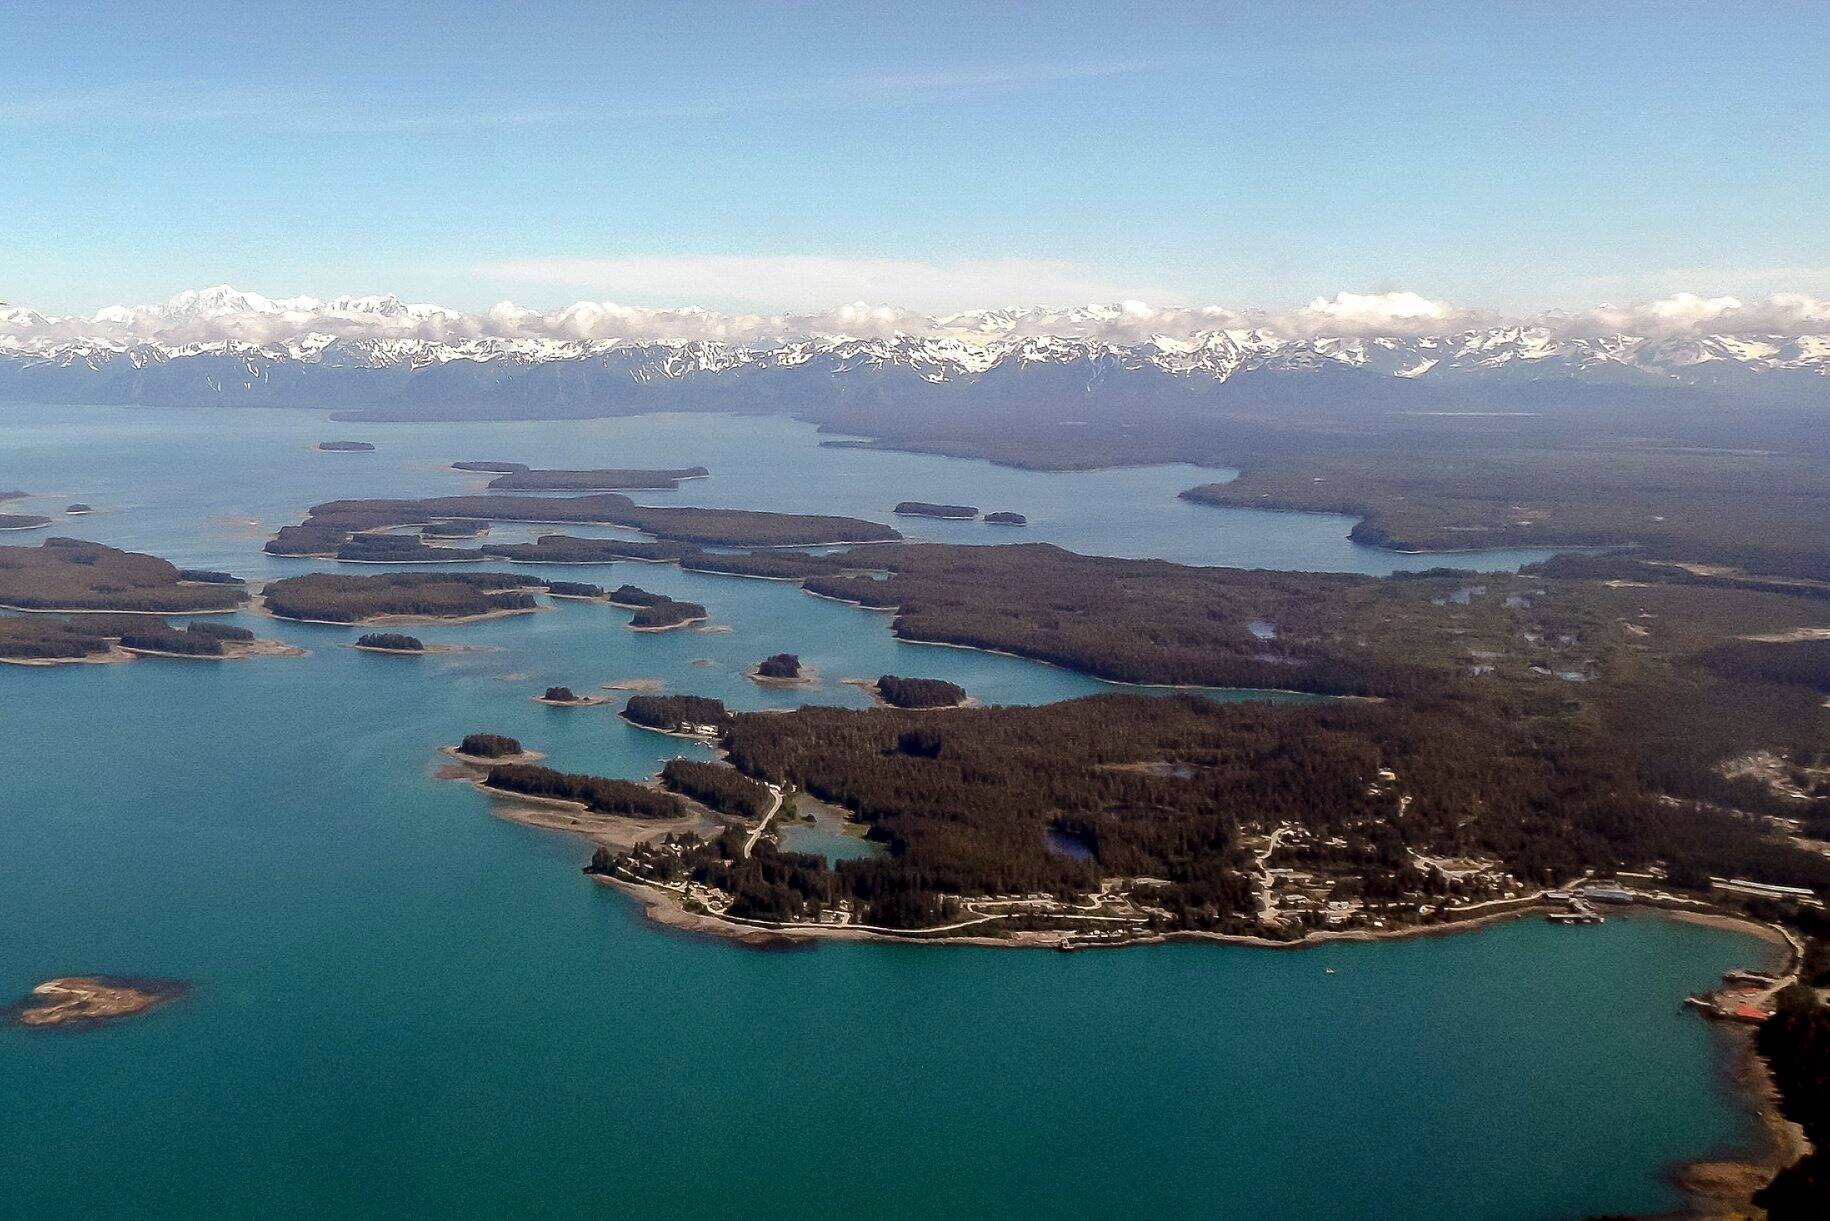 Yakutat, currently the only Southeast Alaska community with an active problem of PFAS in drinking water. Contamination also at or near the airports in Juneau and Gustavus. (National Park Service)